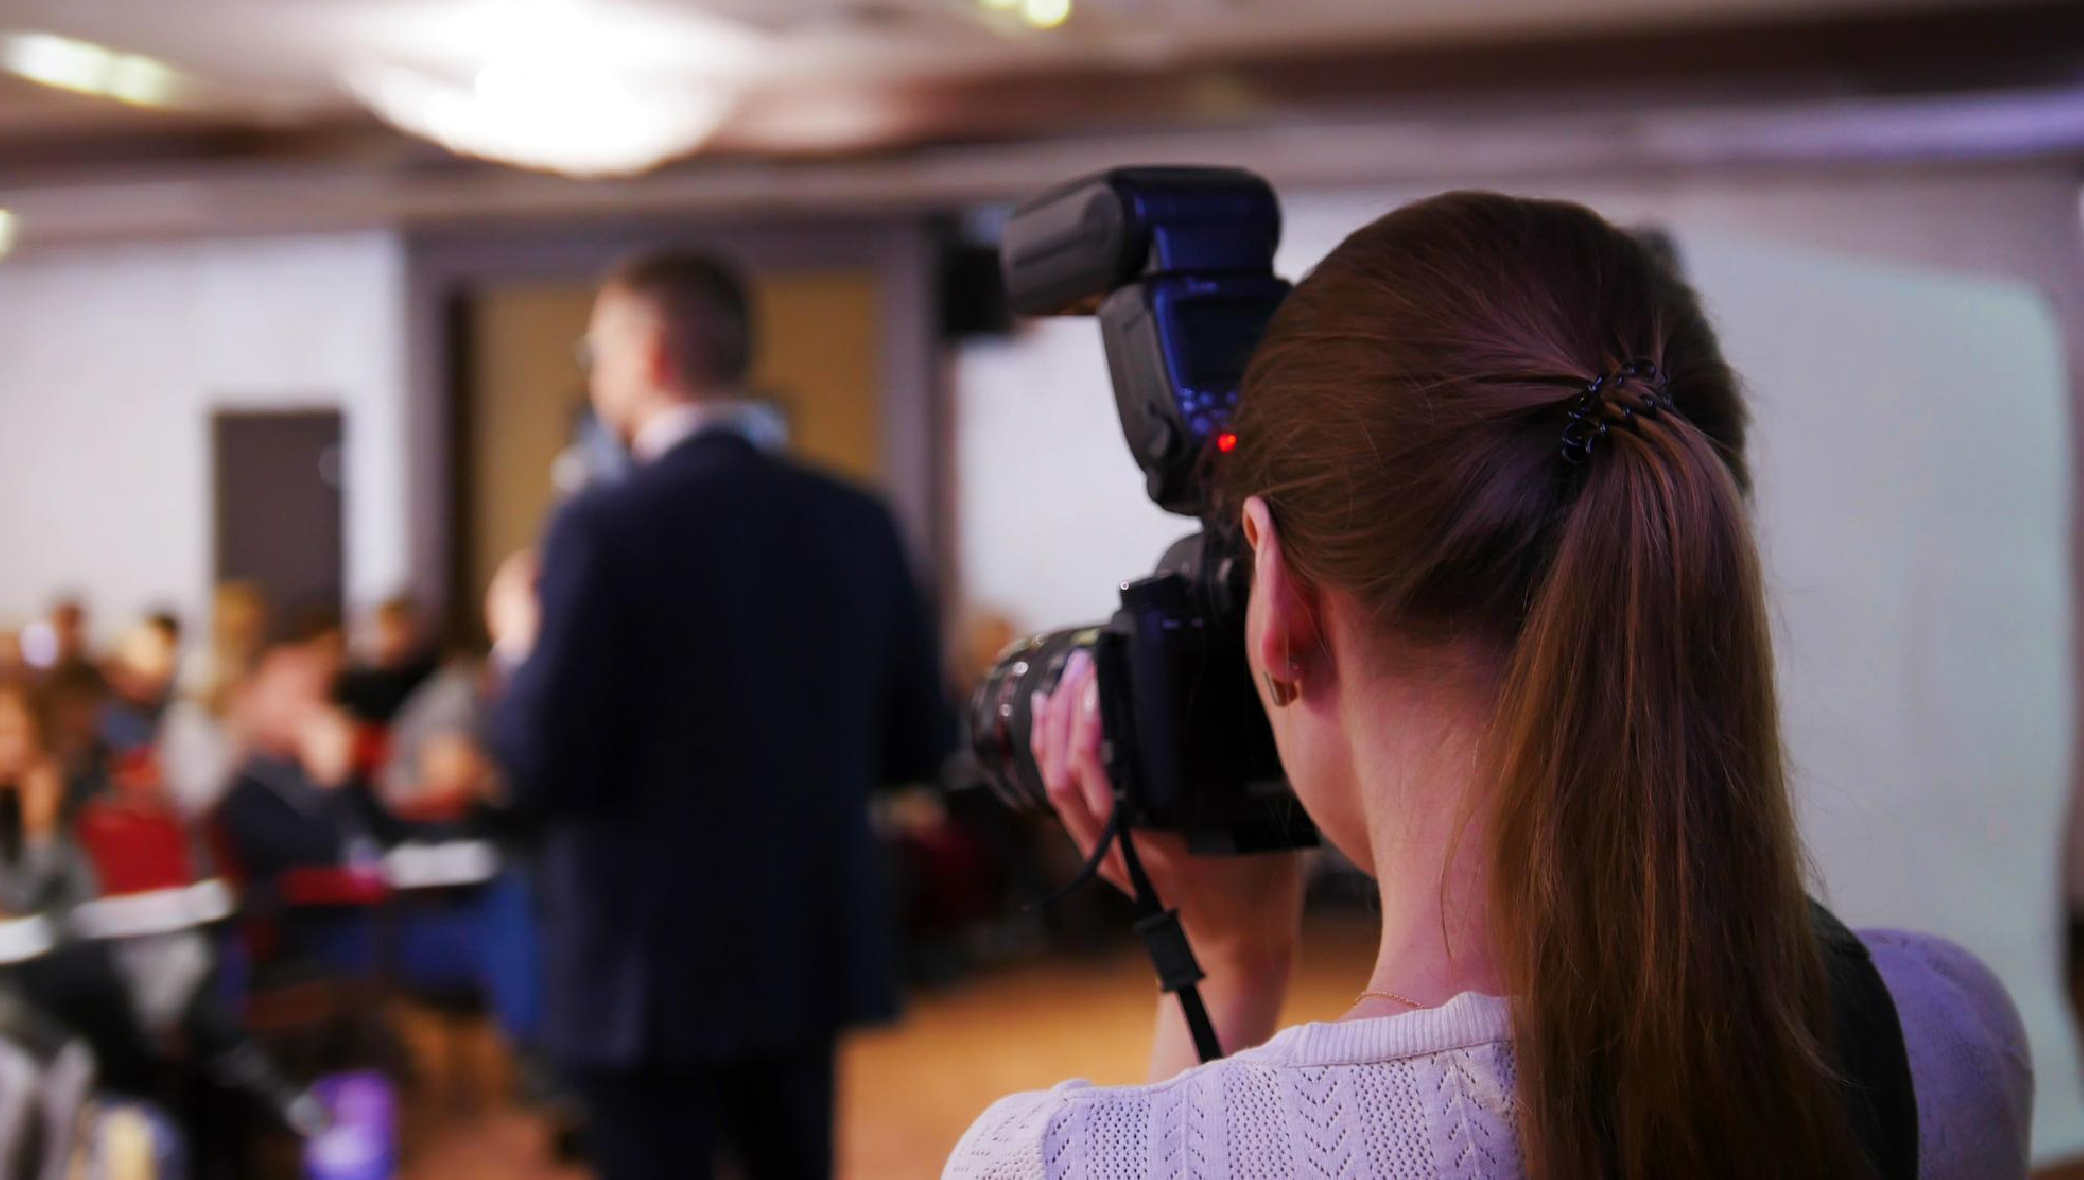 Hiring A Professional Event Photographer - 8 Tips On Hiring A Professional Event Photographer